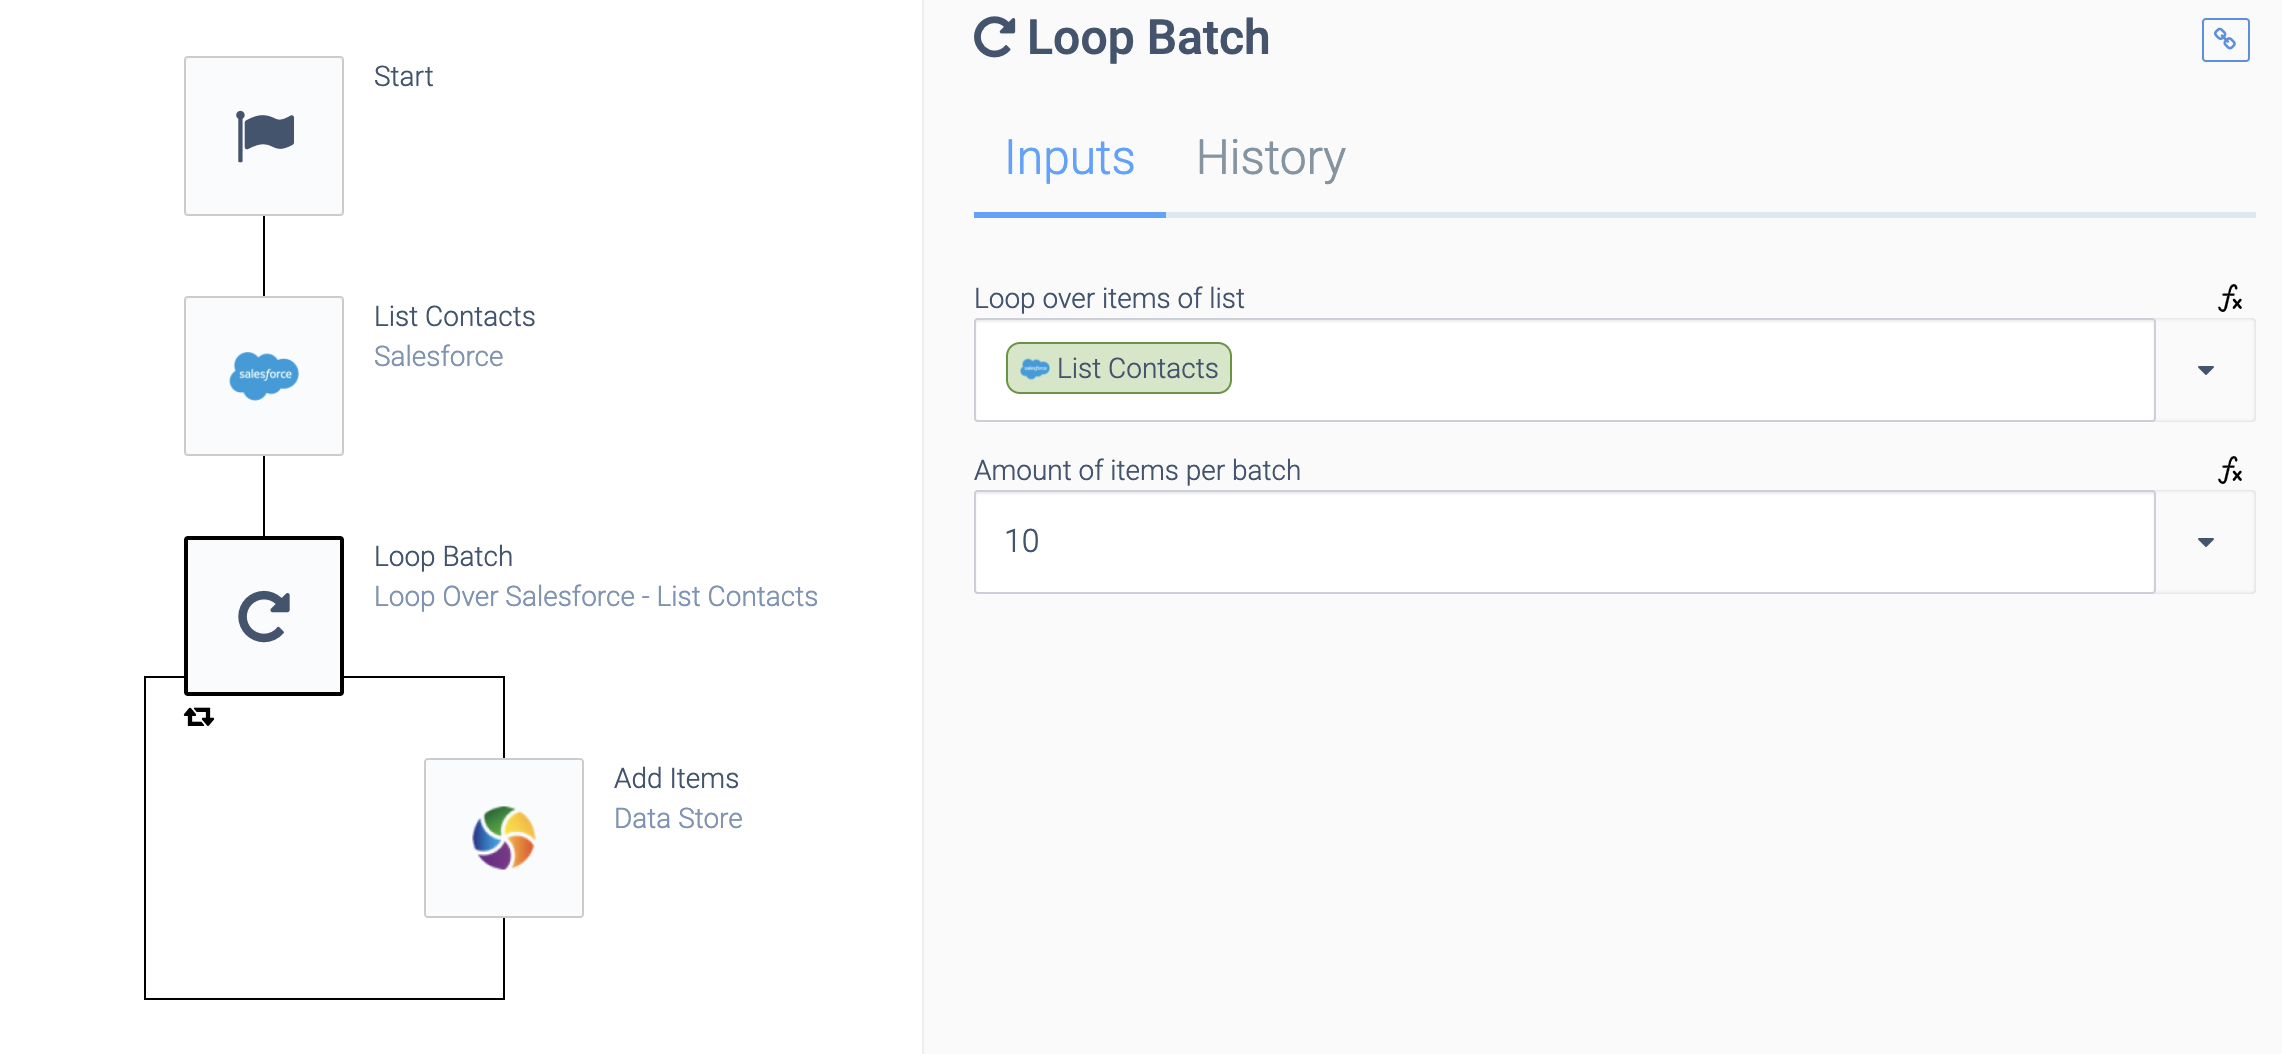 an automation consisting of a Start block, a List Contacts block, and a Loop Batch block containing an Add Items block. The Loop Batch block is selected. Loop over items of list is set to List Contacts, and Amount of items per batch is set to 10.